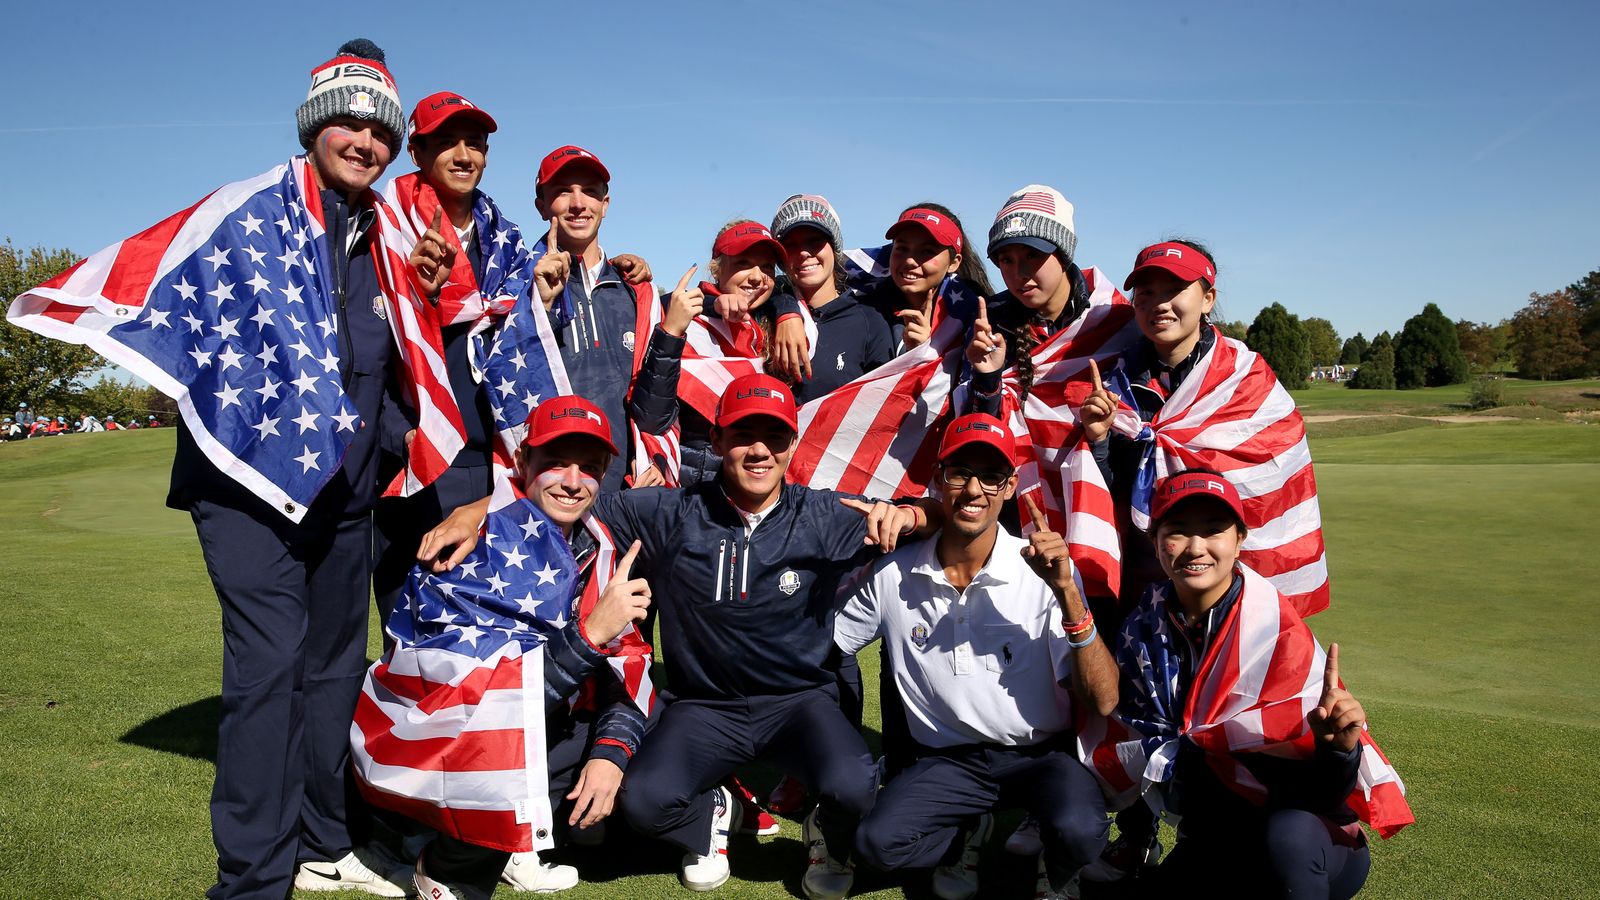 USA clinch sixth straight victory in Junior Ryder Cup in Paris Golf